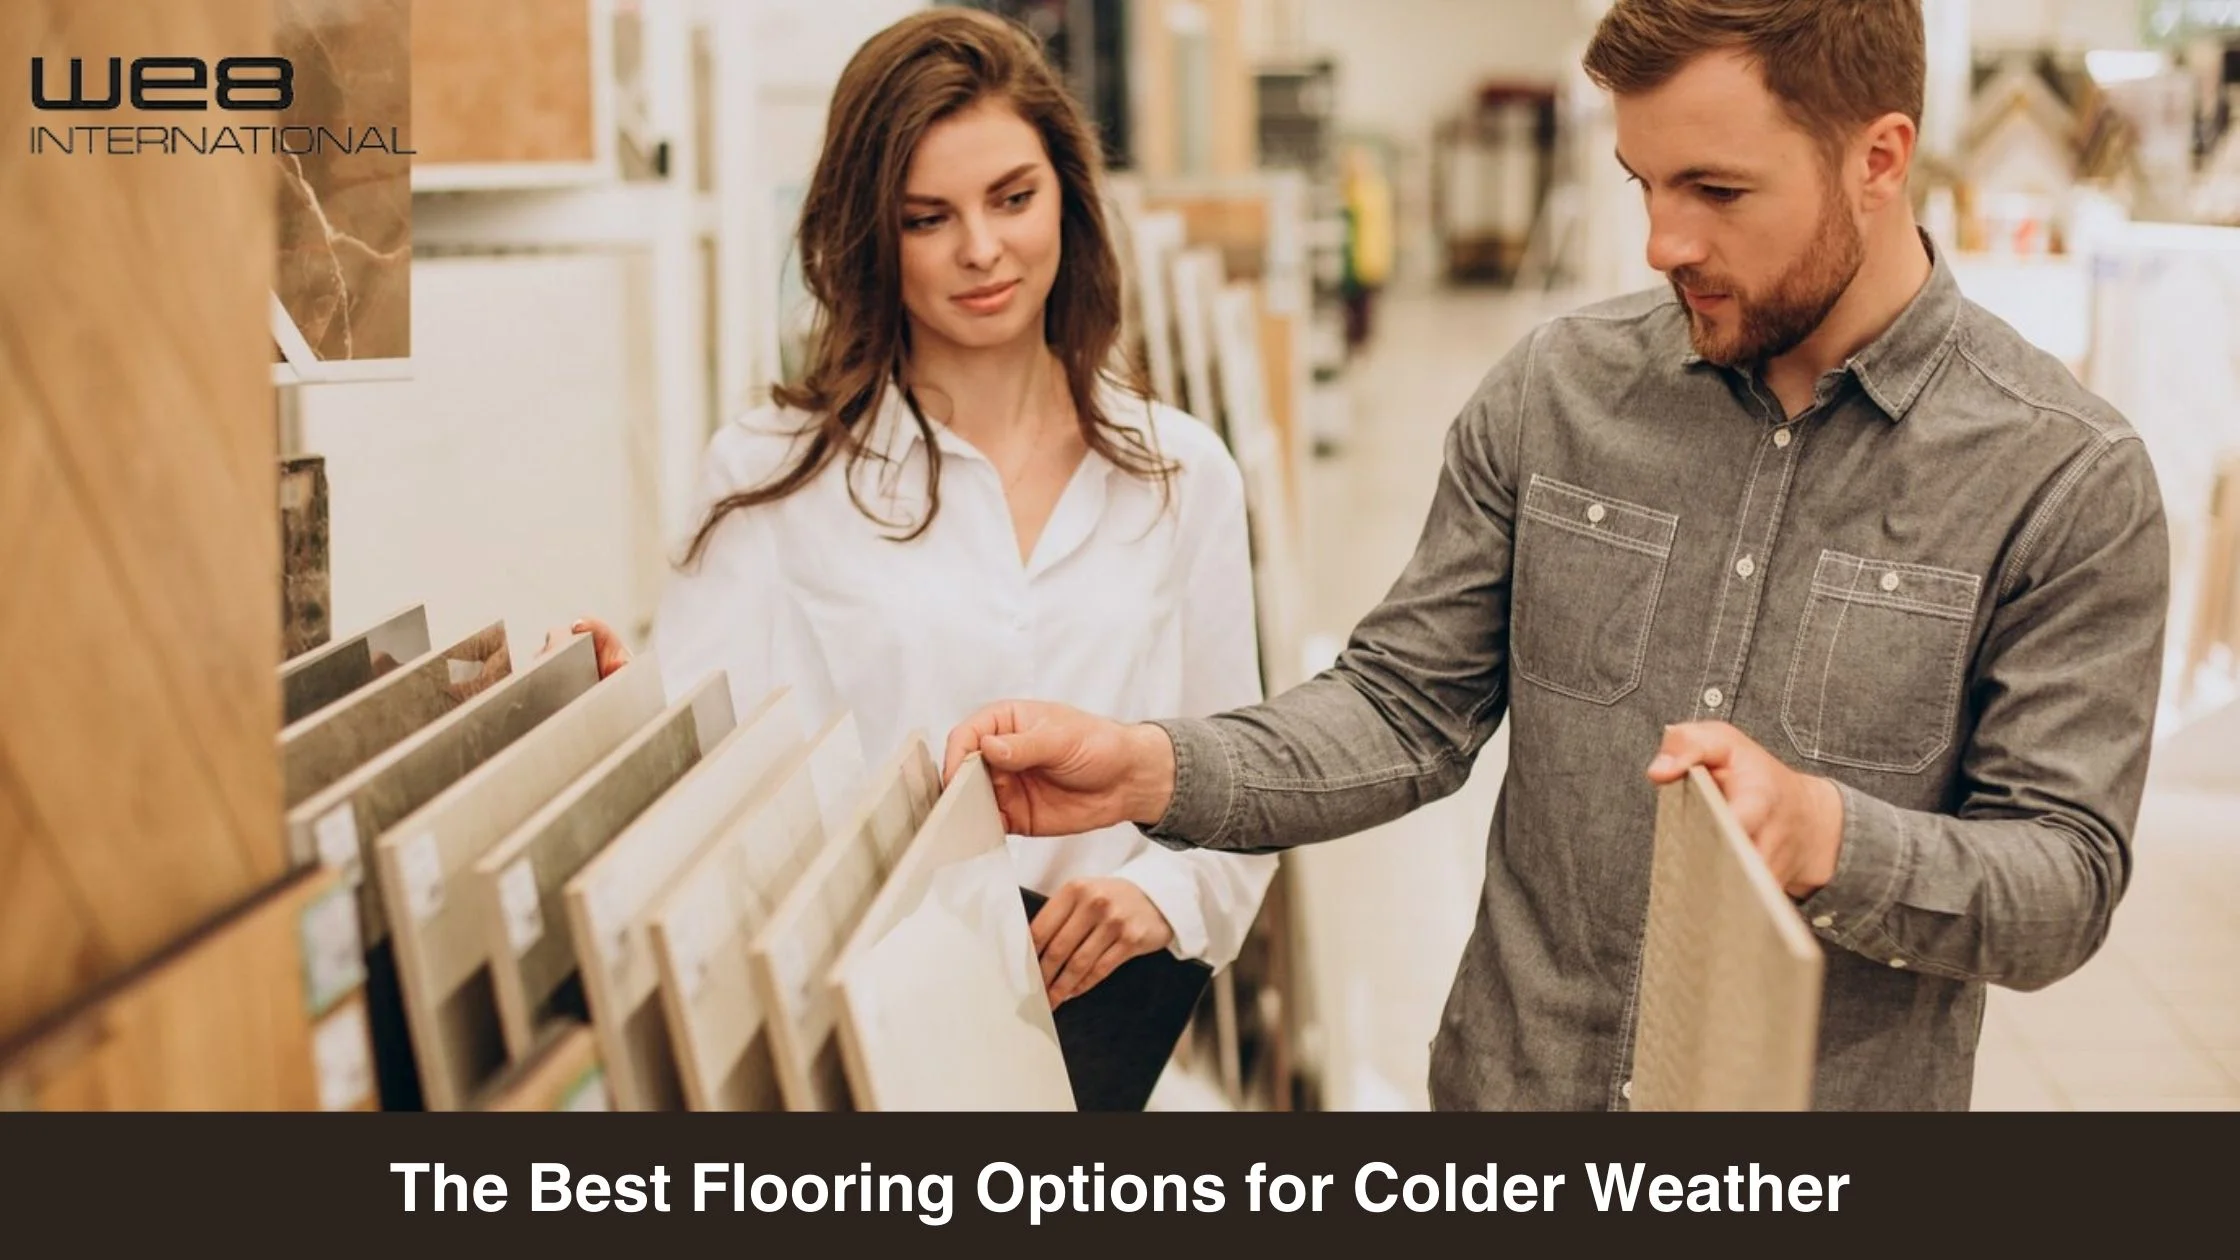 The Best Flooring Options for Colder Weather